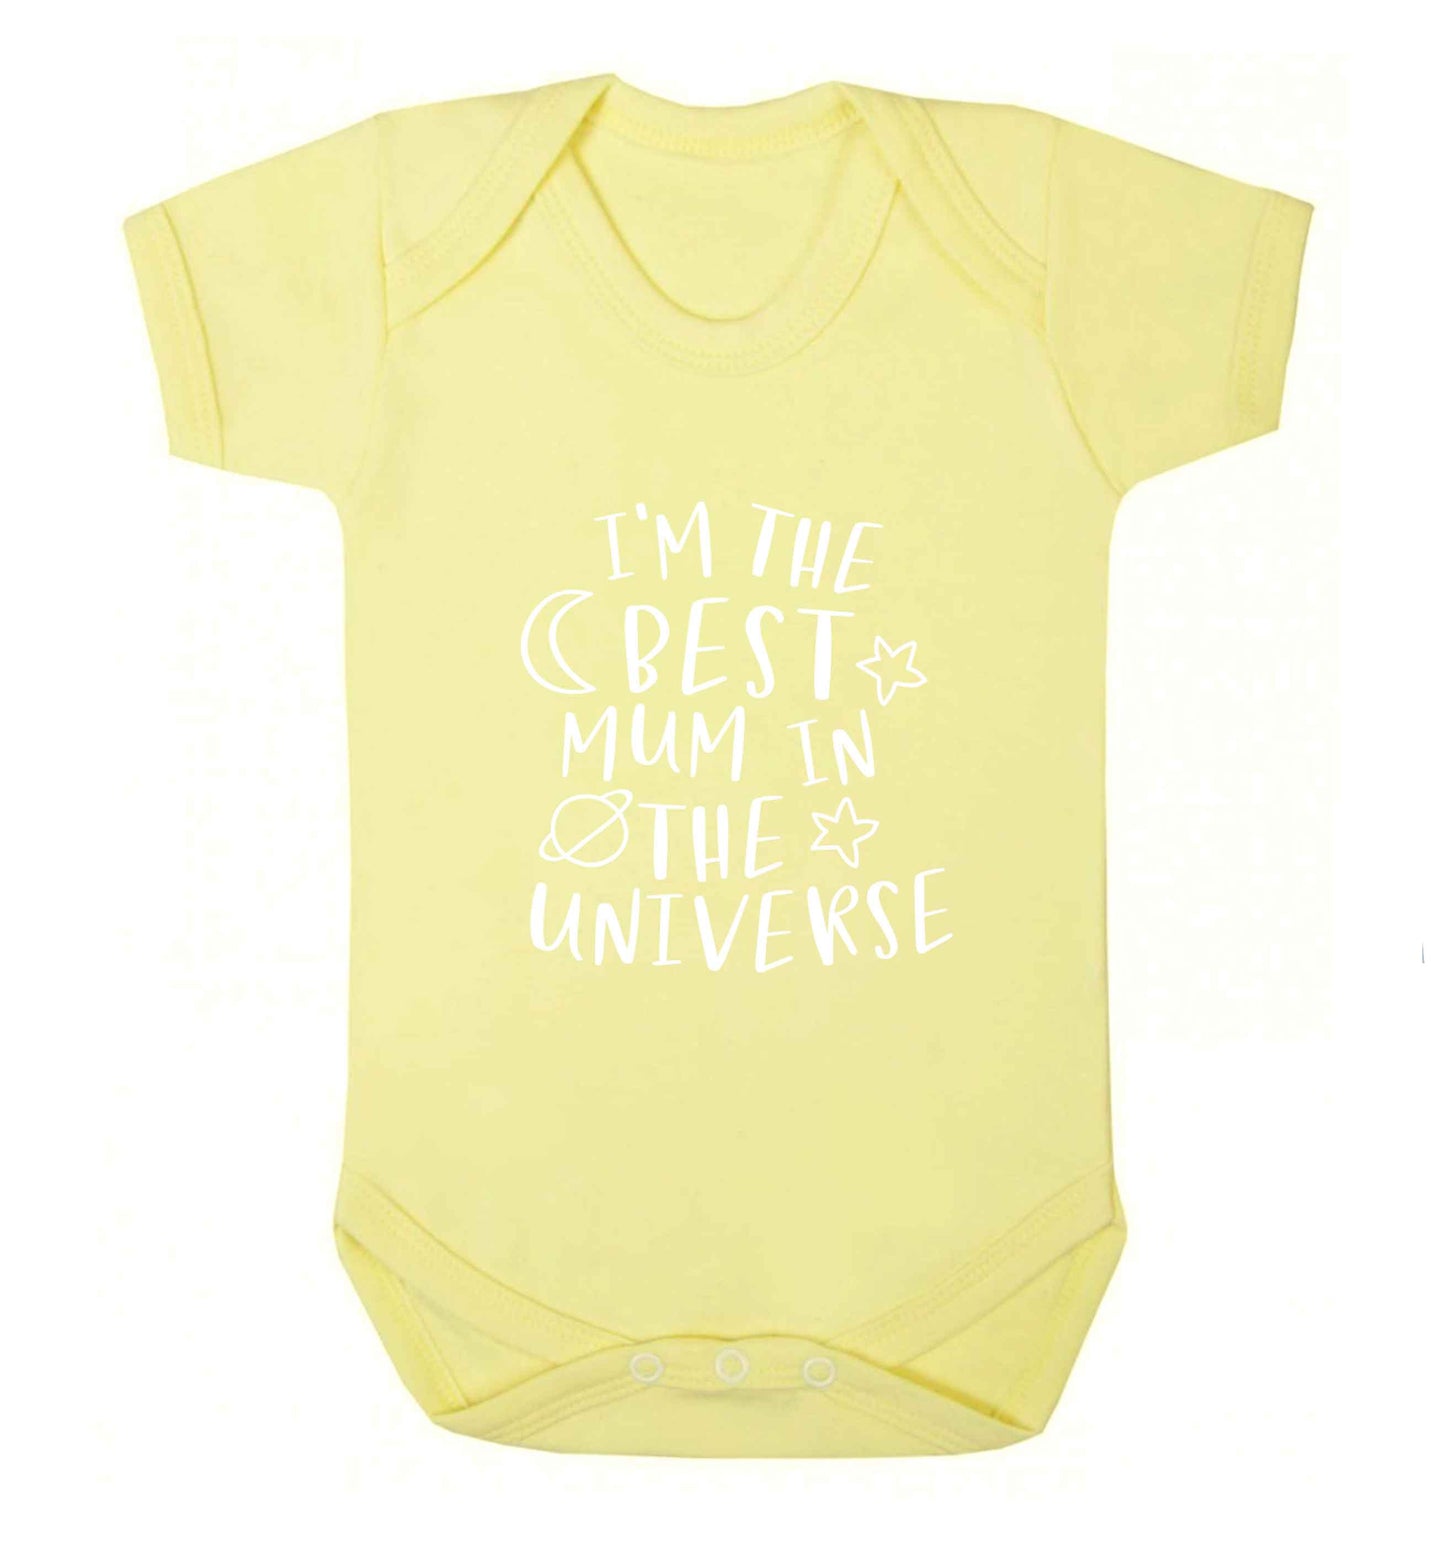 I'm the best mum in the universe baby vest pale yellow 18-24 months